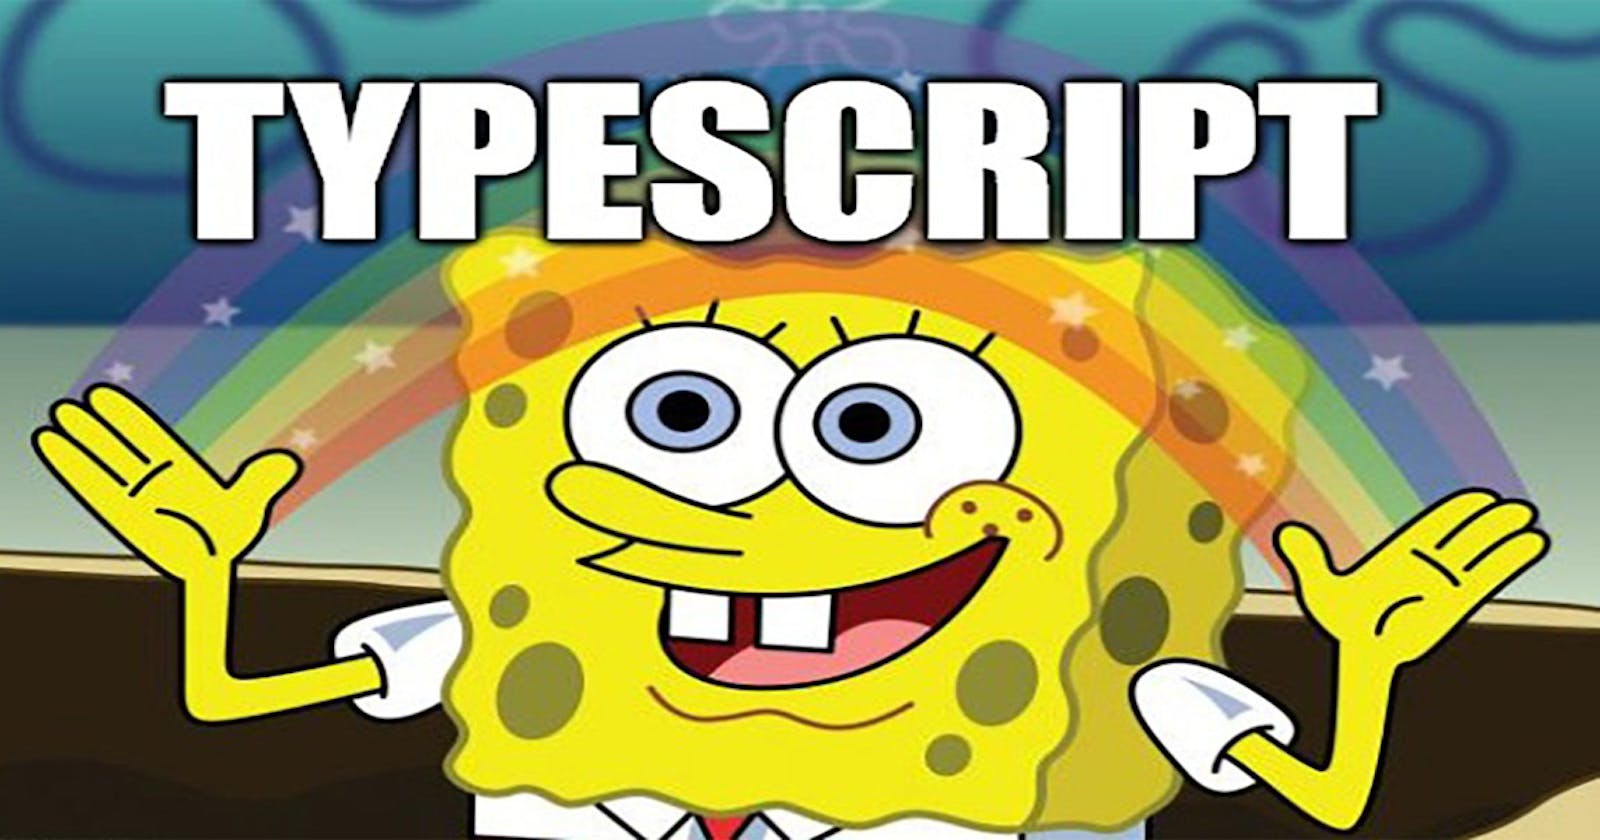 Getting started with Typescript